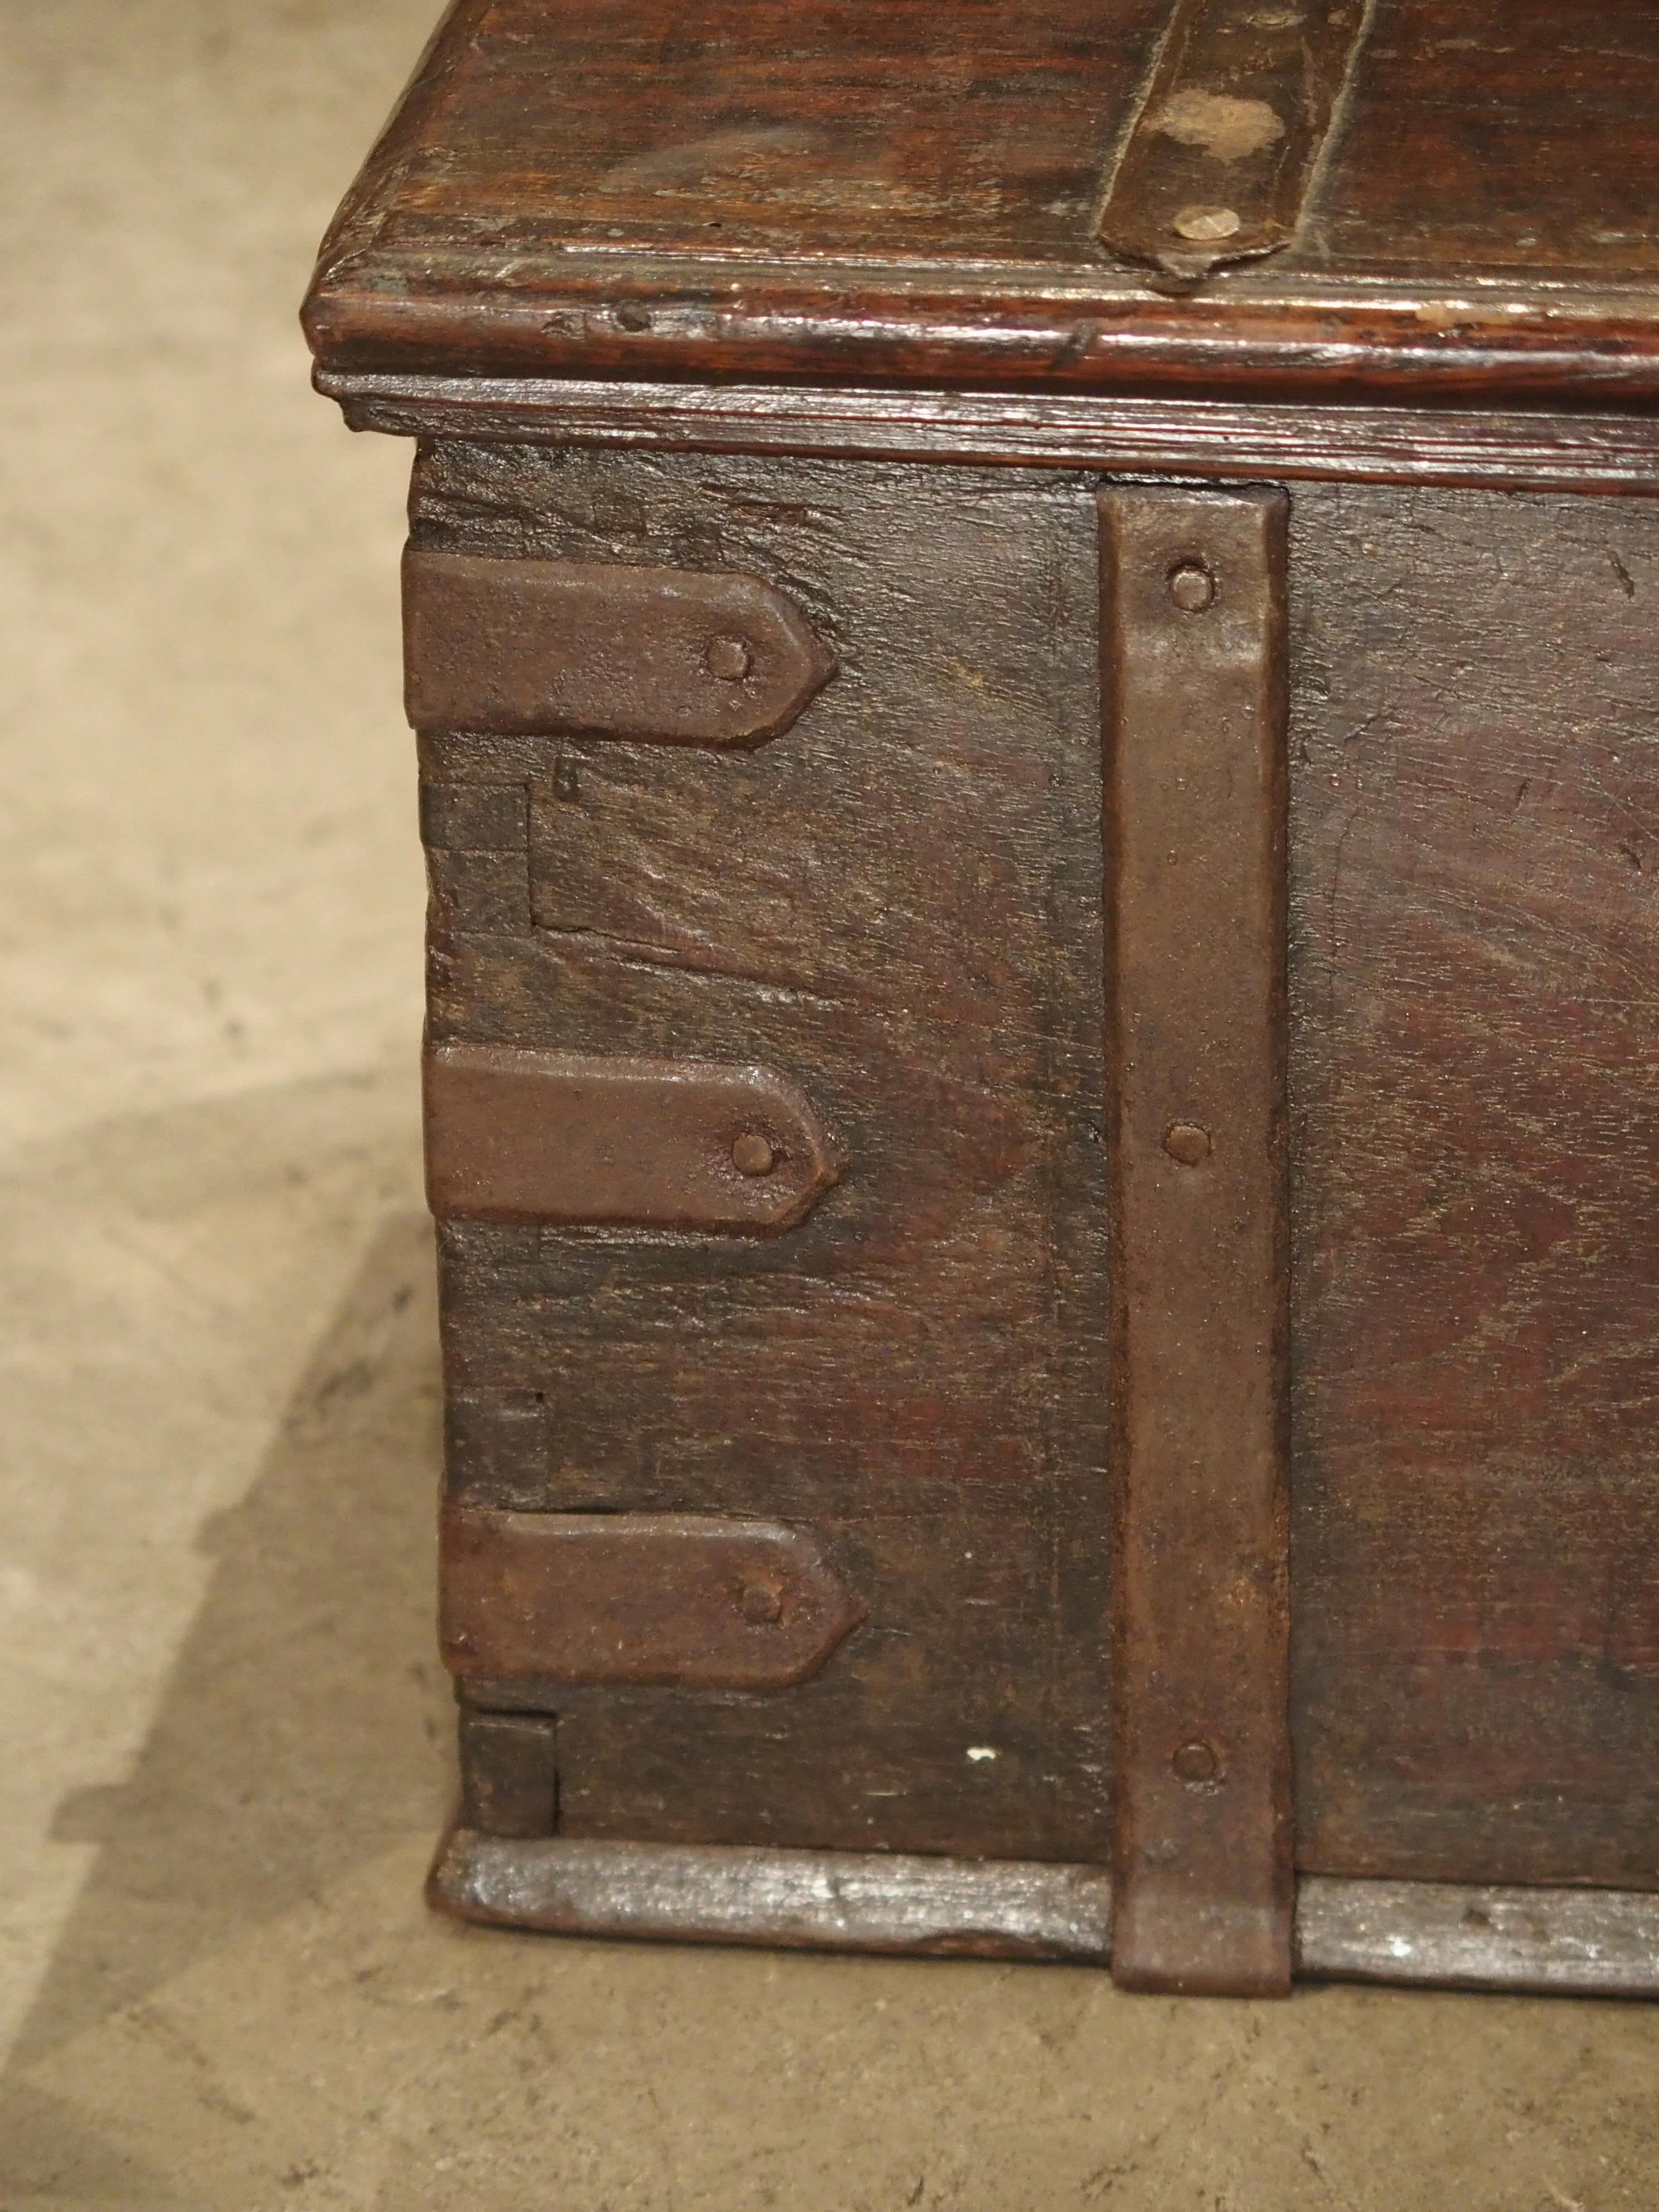 British Colonial Antique Iron Mounted Mahogany Trunk with Copper Handles, 19th Century